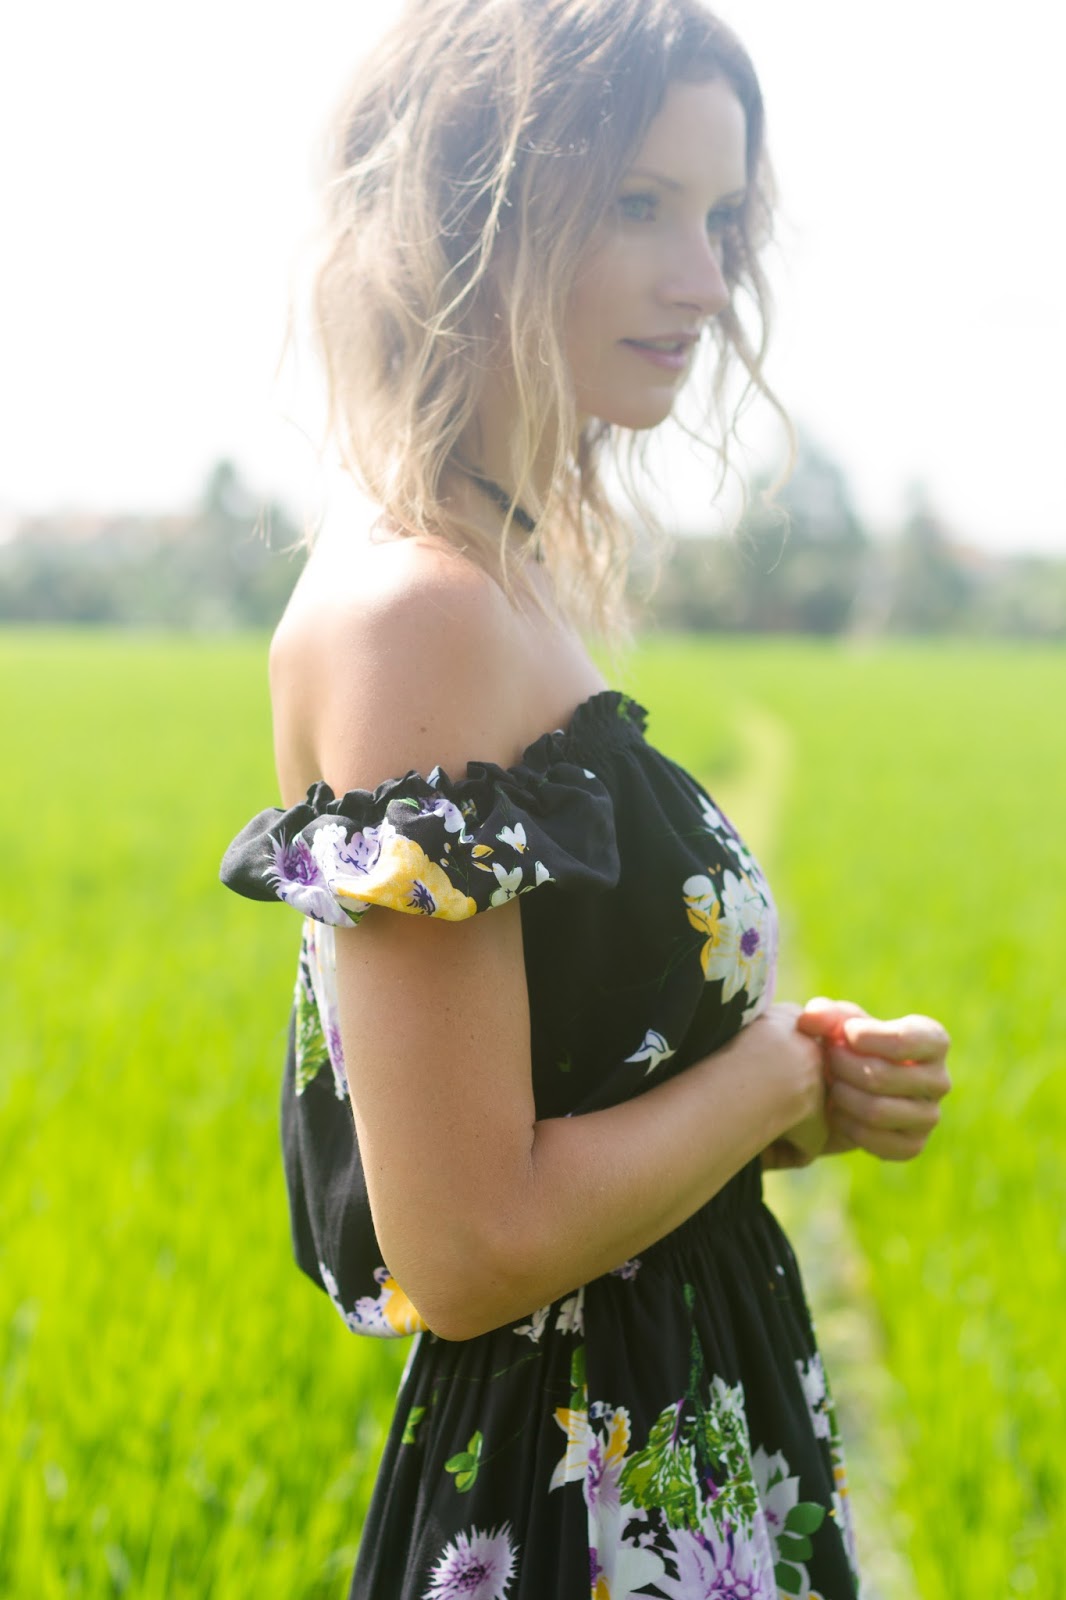 fashion and travel blogger, Alison Hutchinson, i s wearing the KAYVALYA Rosie Off The Shoulder Dress in Black Floral in a rice field in Bali